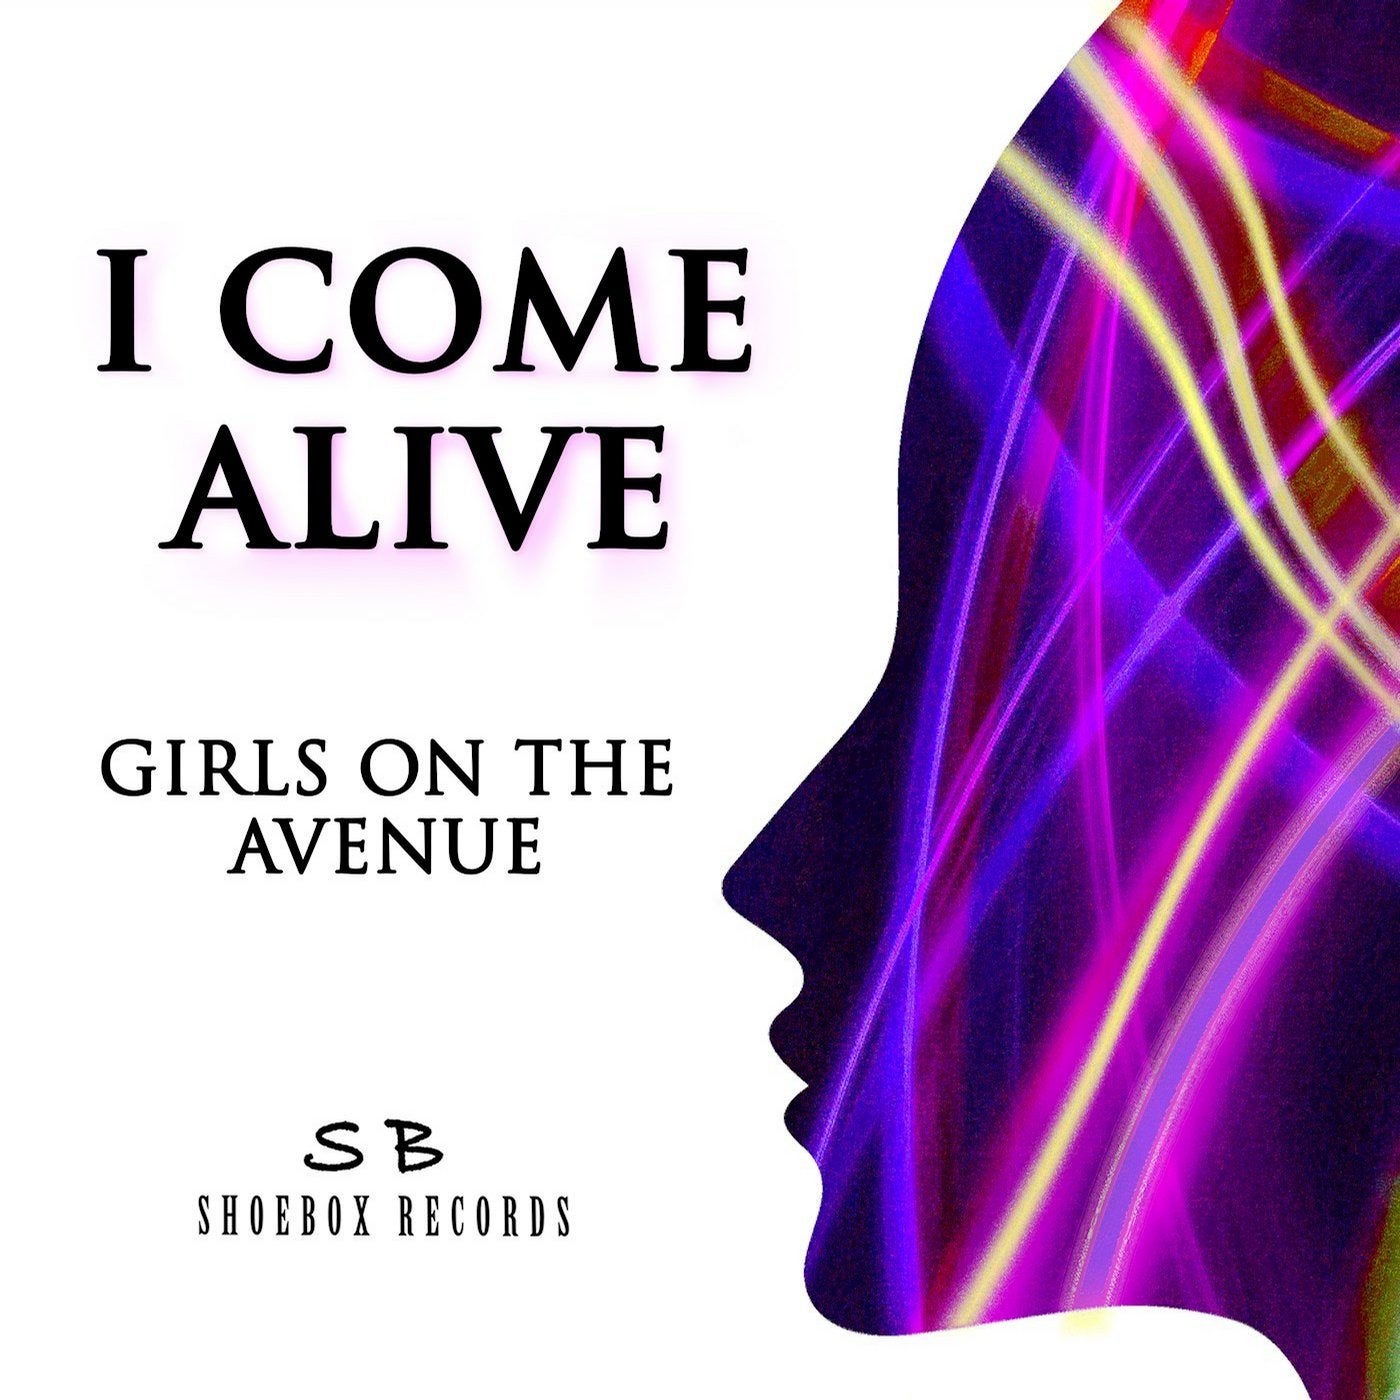 I COME ALIVE (COUNTRY CLUB MARTINI CREW Remix / Extended Remix) by GIRLS ON  THE AVENUE on Beatport